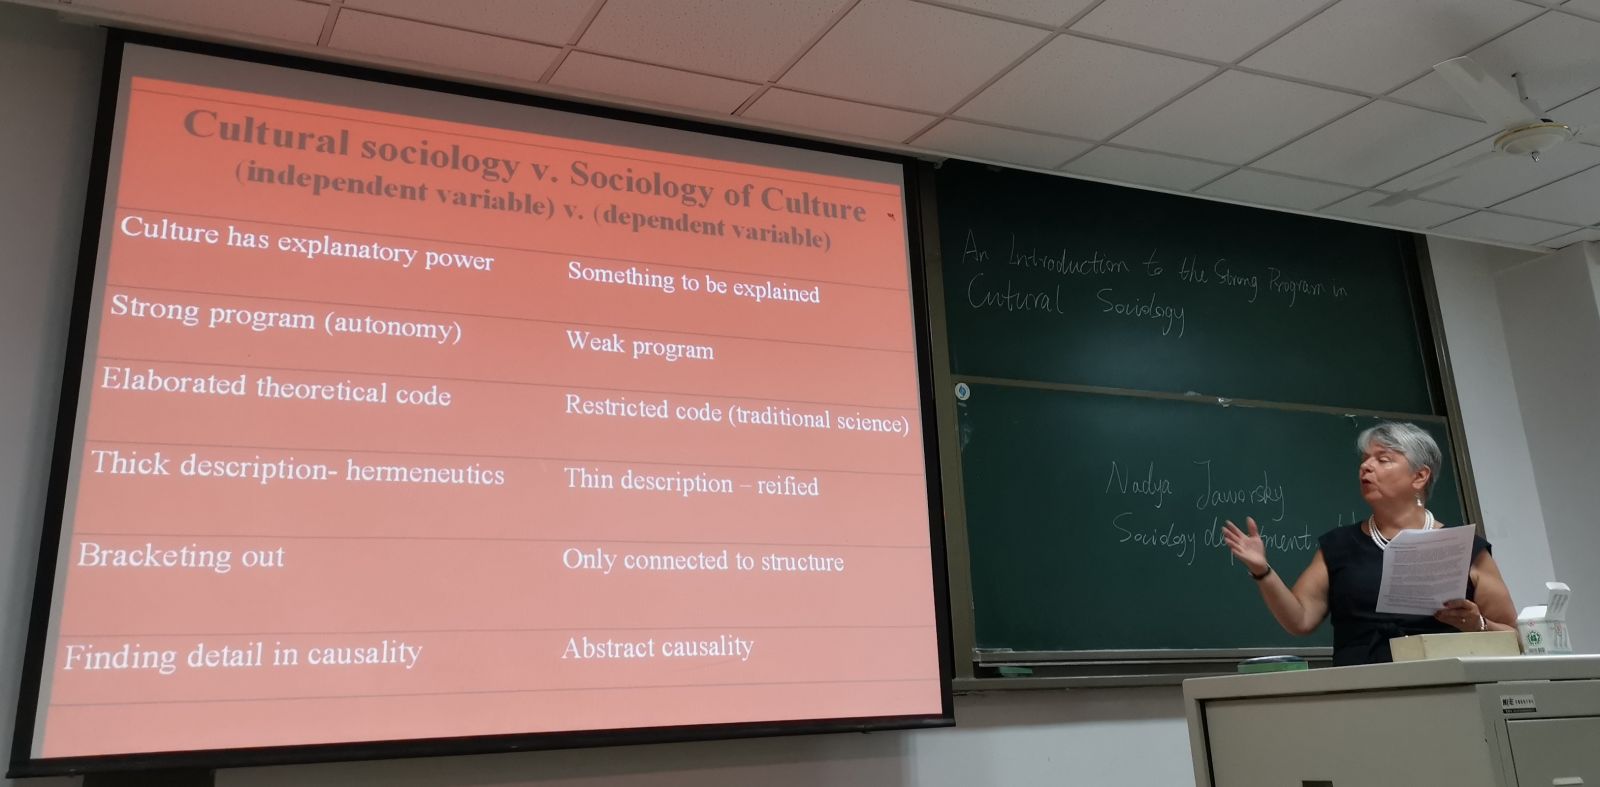  &quot;An Introduction to the Strong Program in Cultural Sociology&quot;